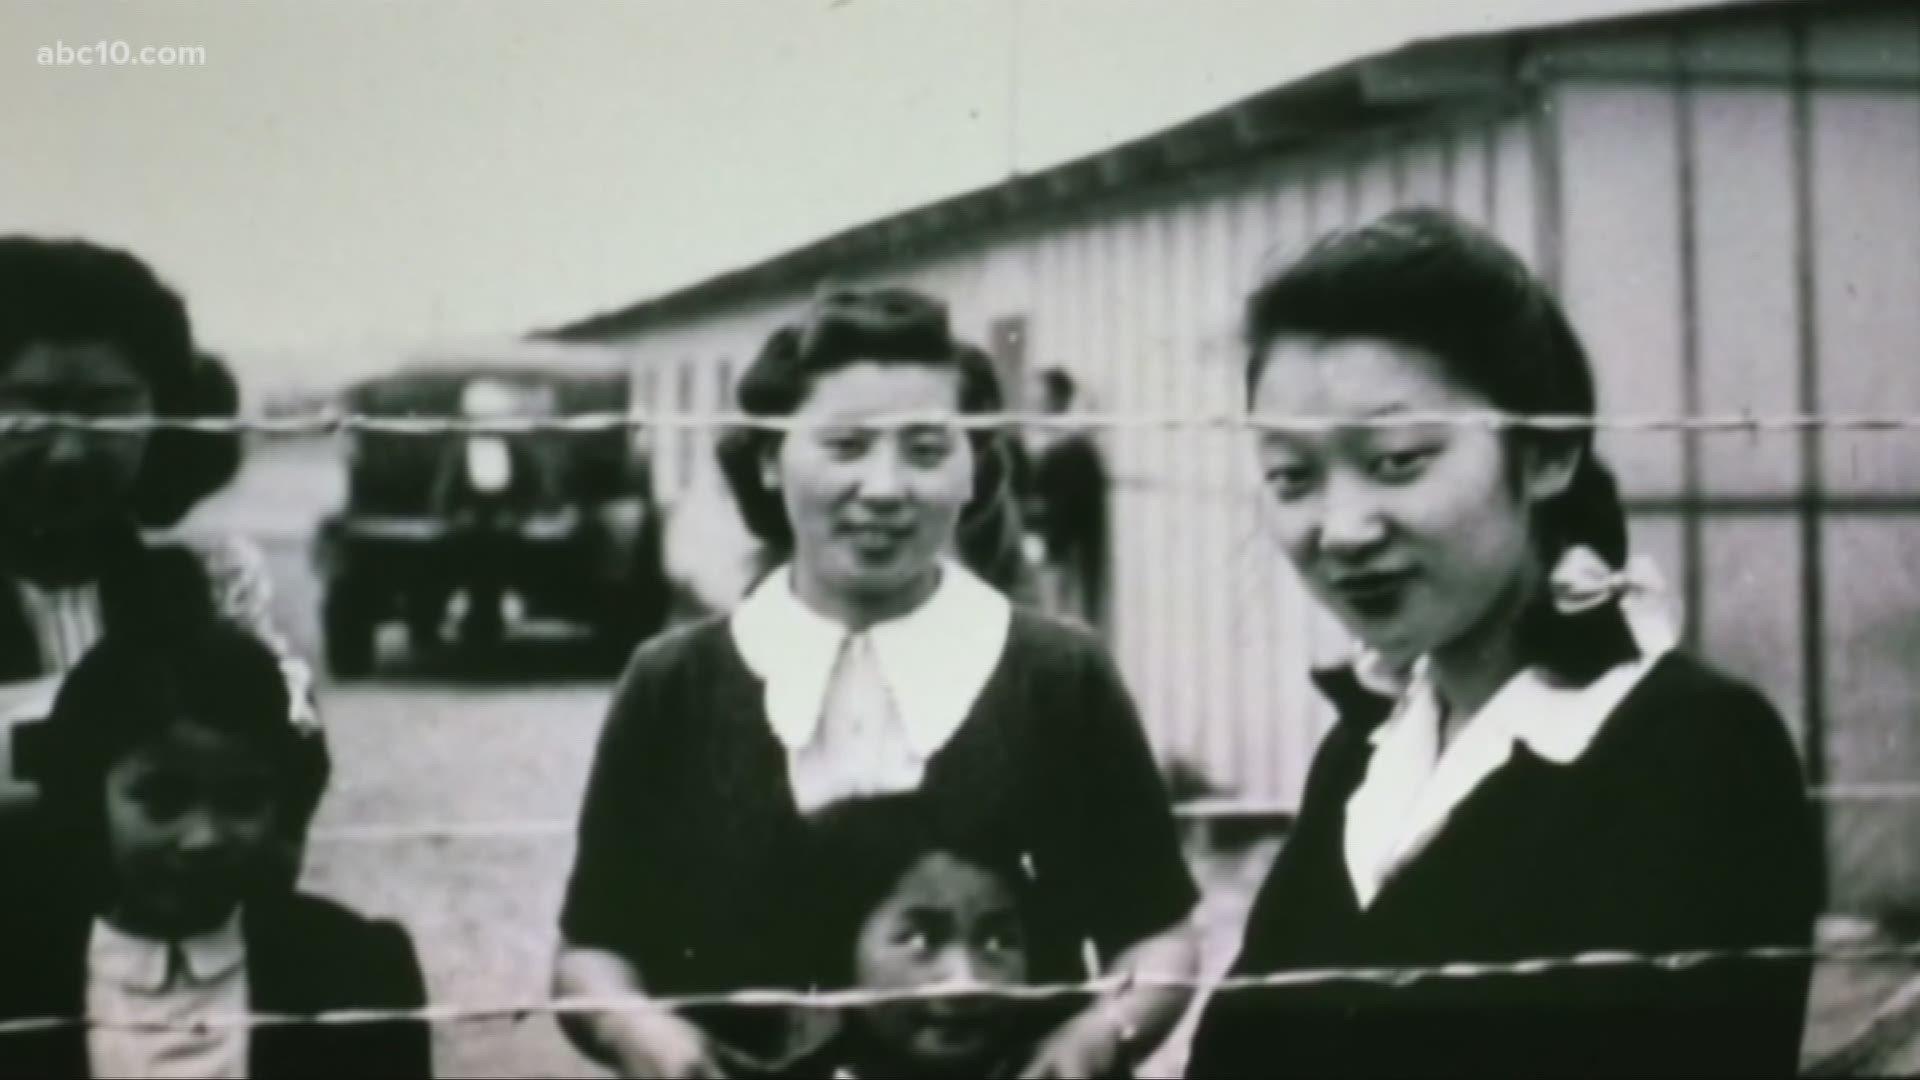 California is expected to formally apologize for its role in what became the largest single forced relocation of Japanese Americans to internment camps during WWII.